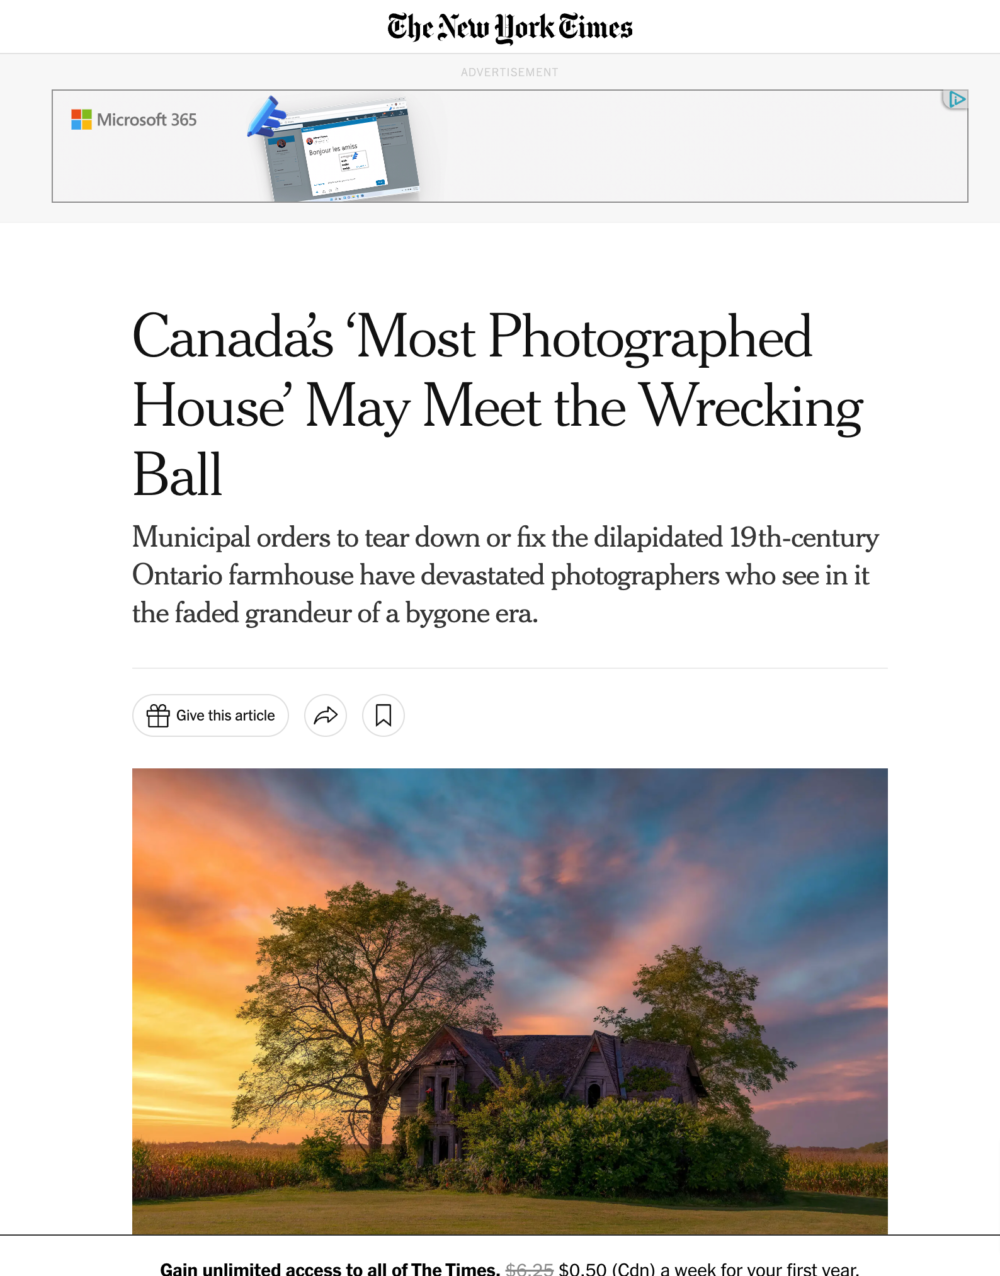 Canada’s-‘Most-Photographed-House’-May-Meet-the-Wrecking-Ball-The-New-York-Times